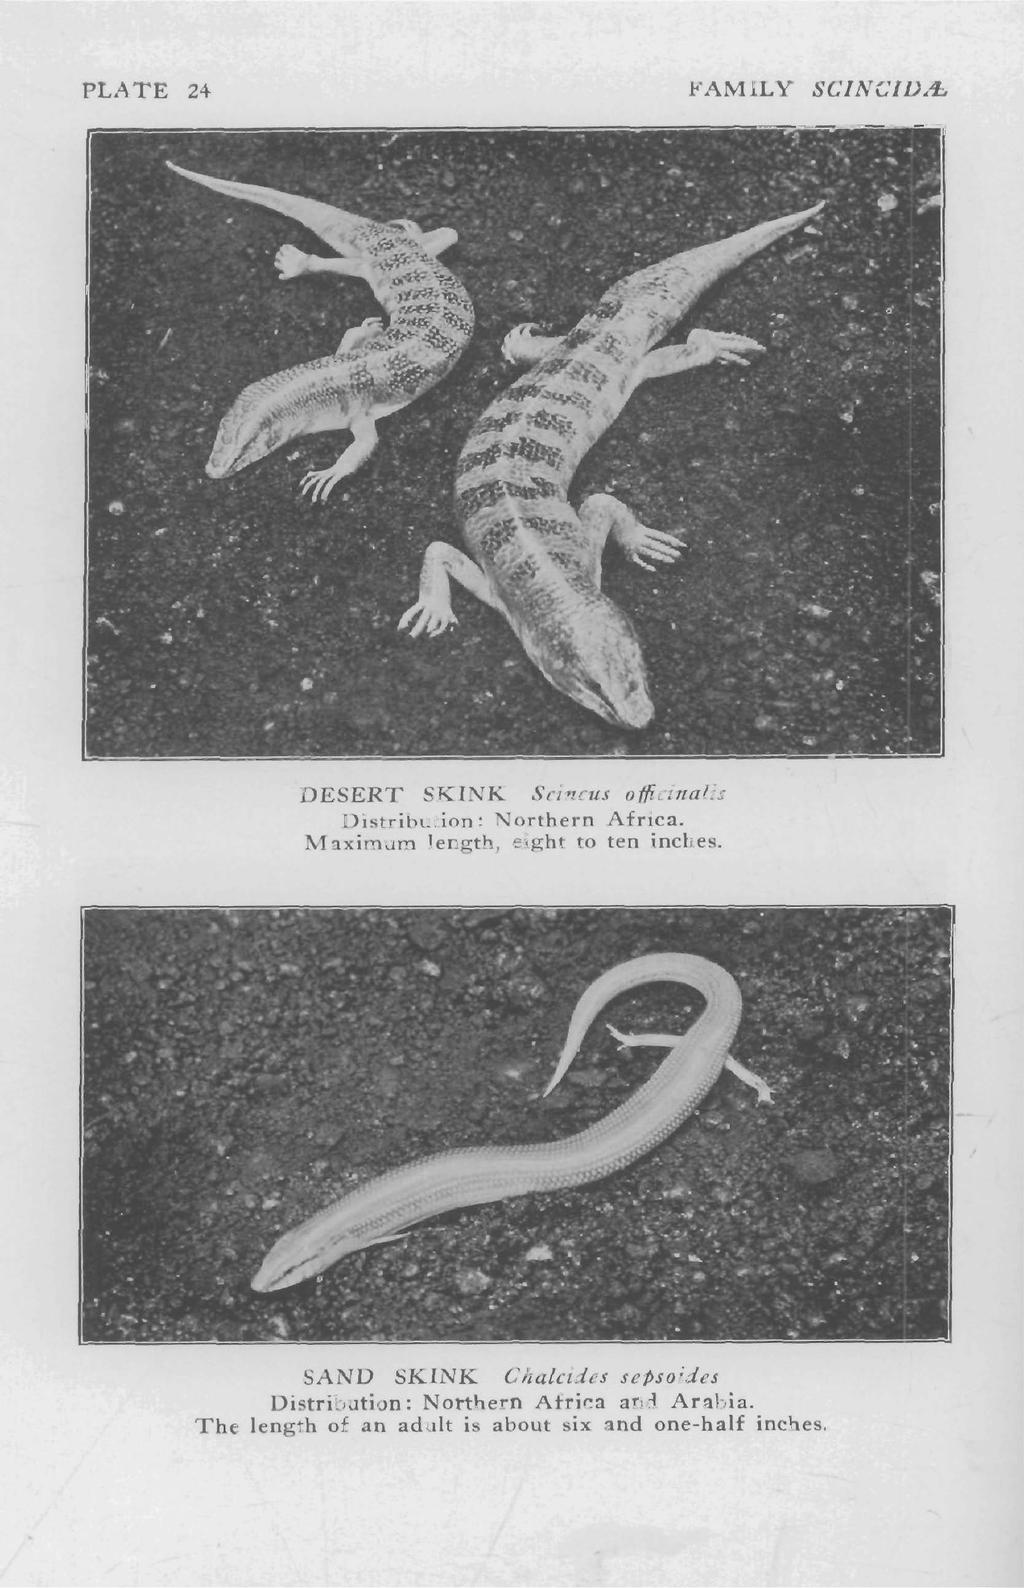 PLATE 24 FAMILY SCINCIV.i:. DESERT SKINK Scincus officinalis Distribution: Northern Africa. Maximum length, eight to ten inches.